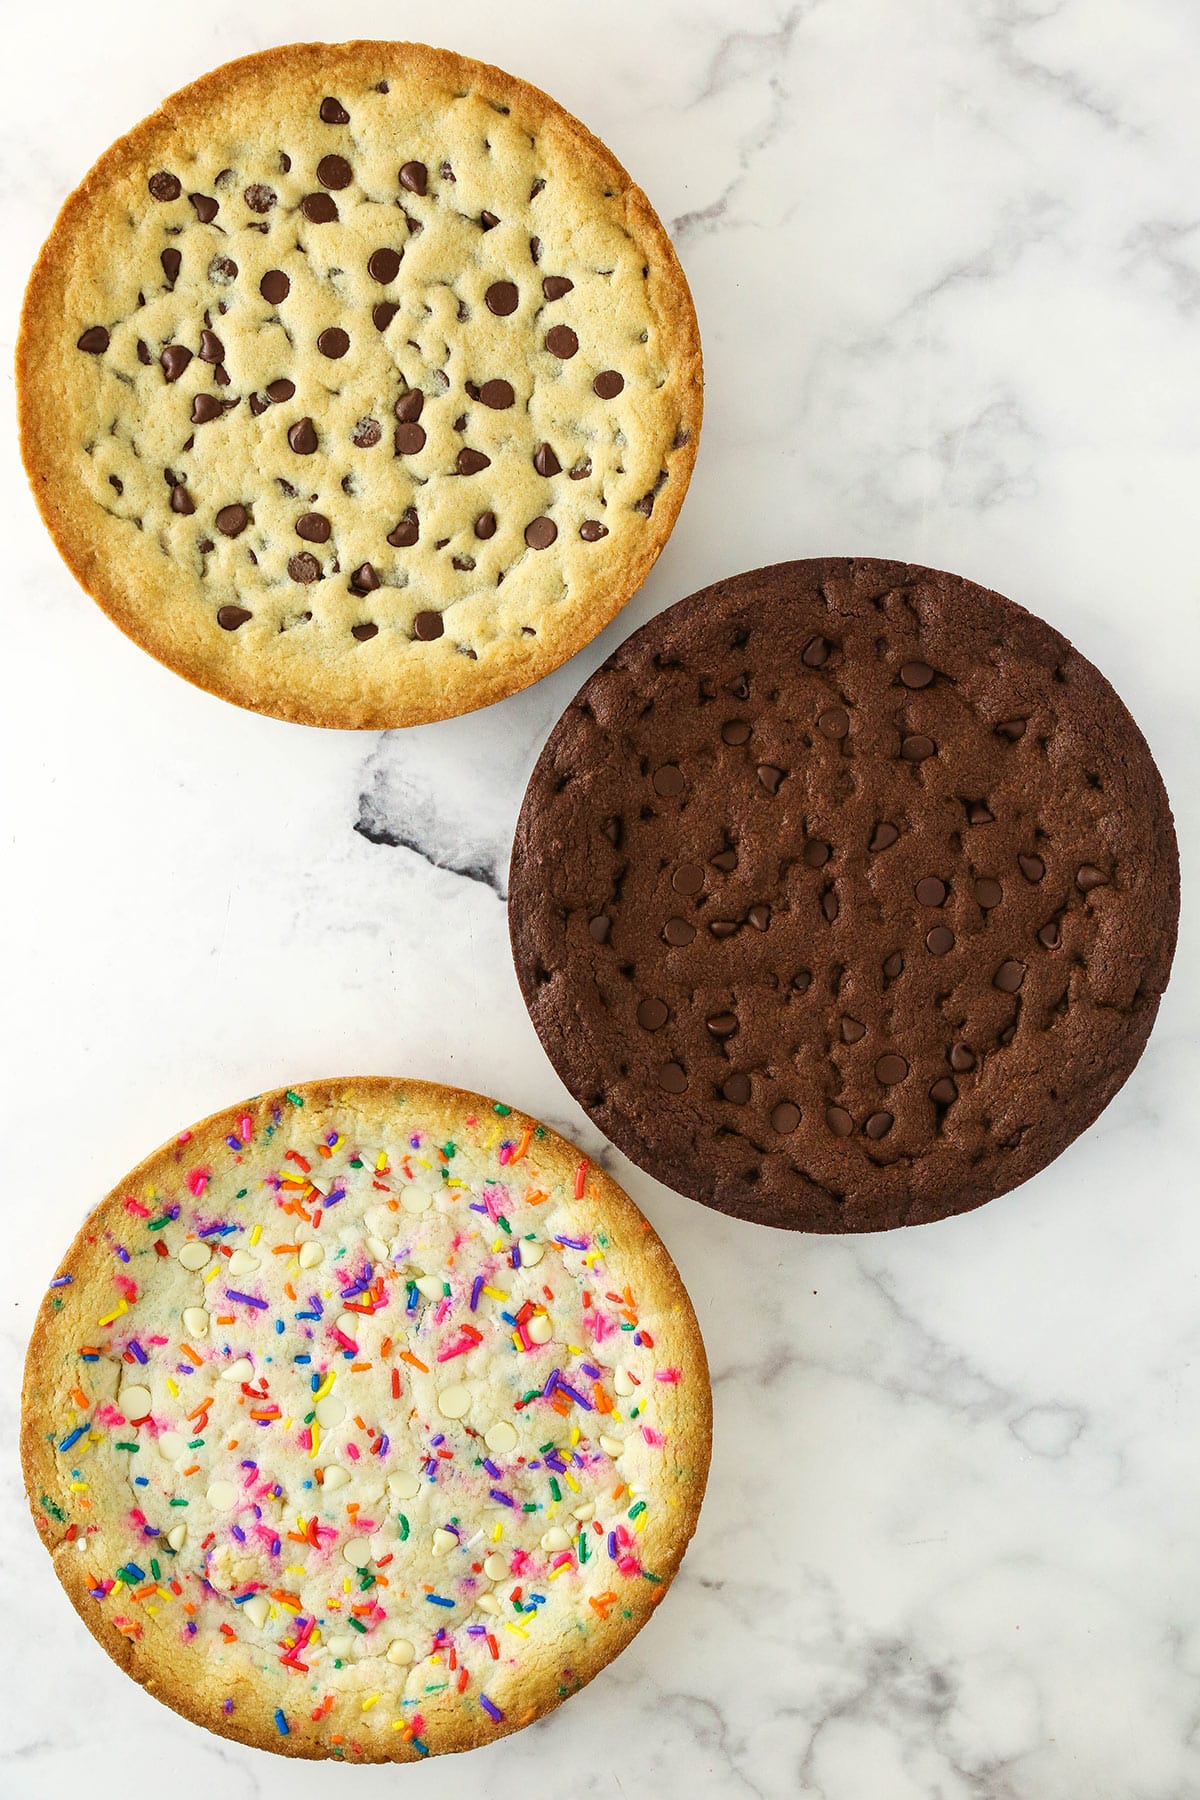 image of the three baked cookies sitting on a marble countertop